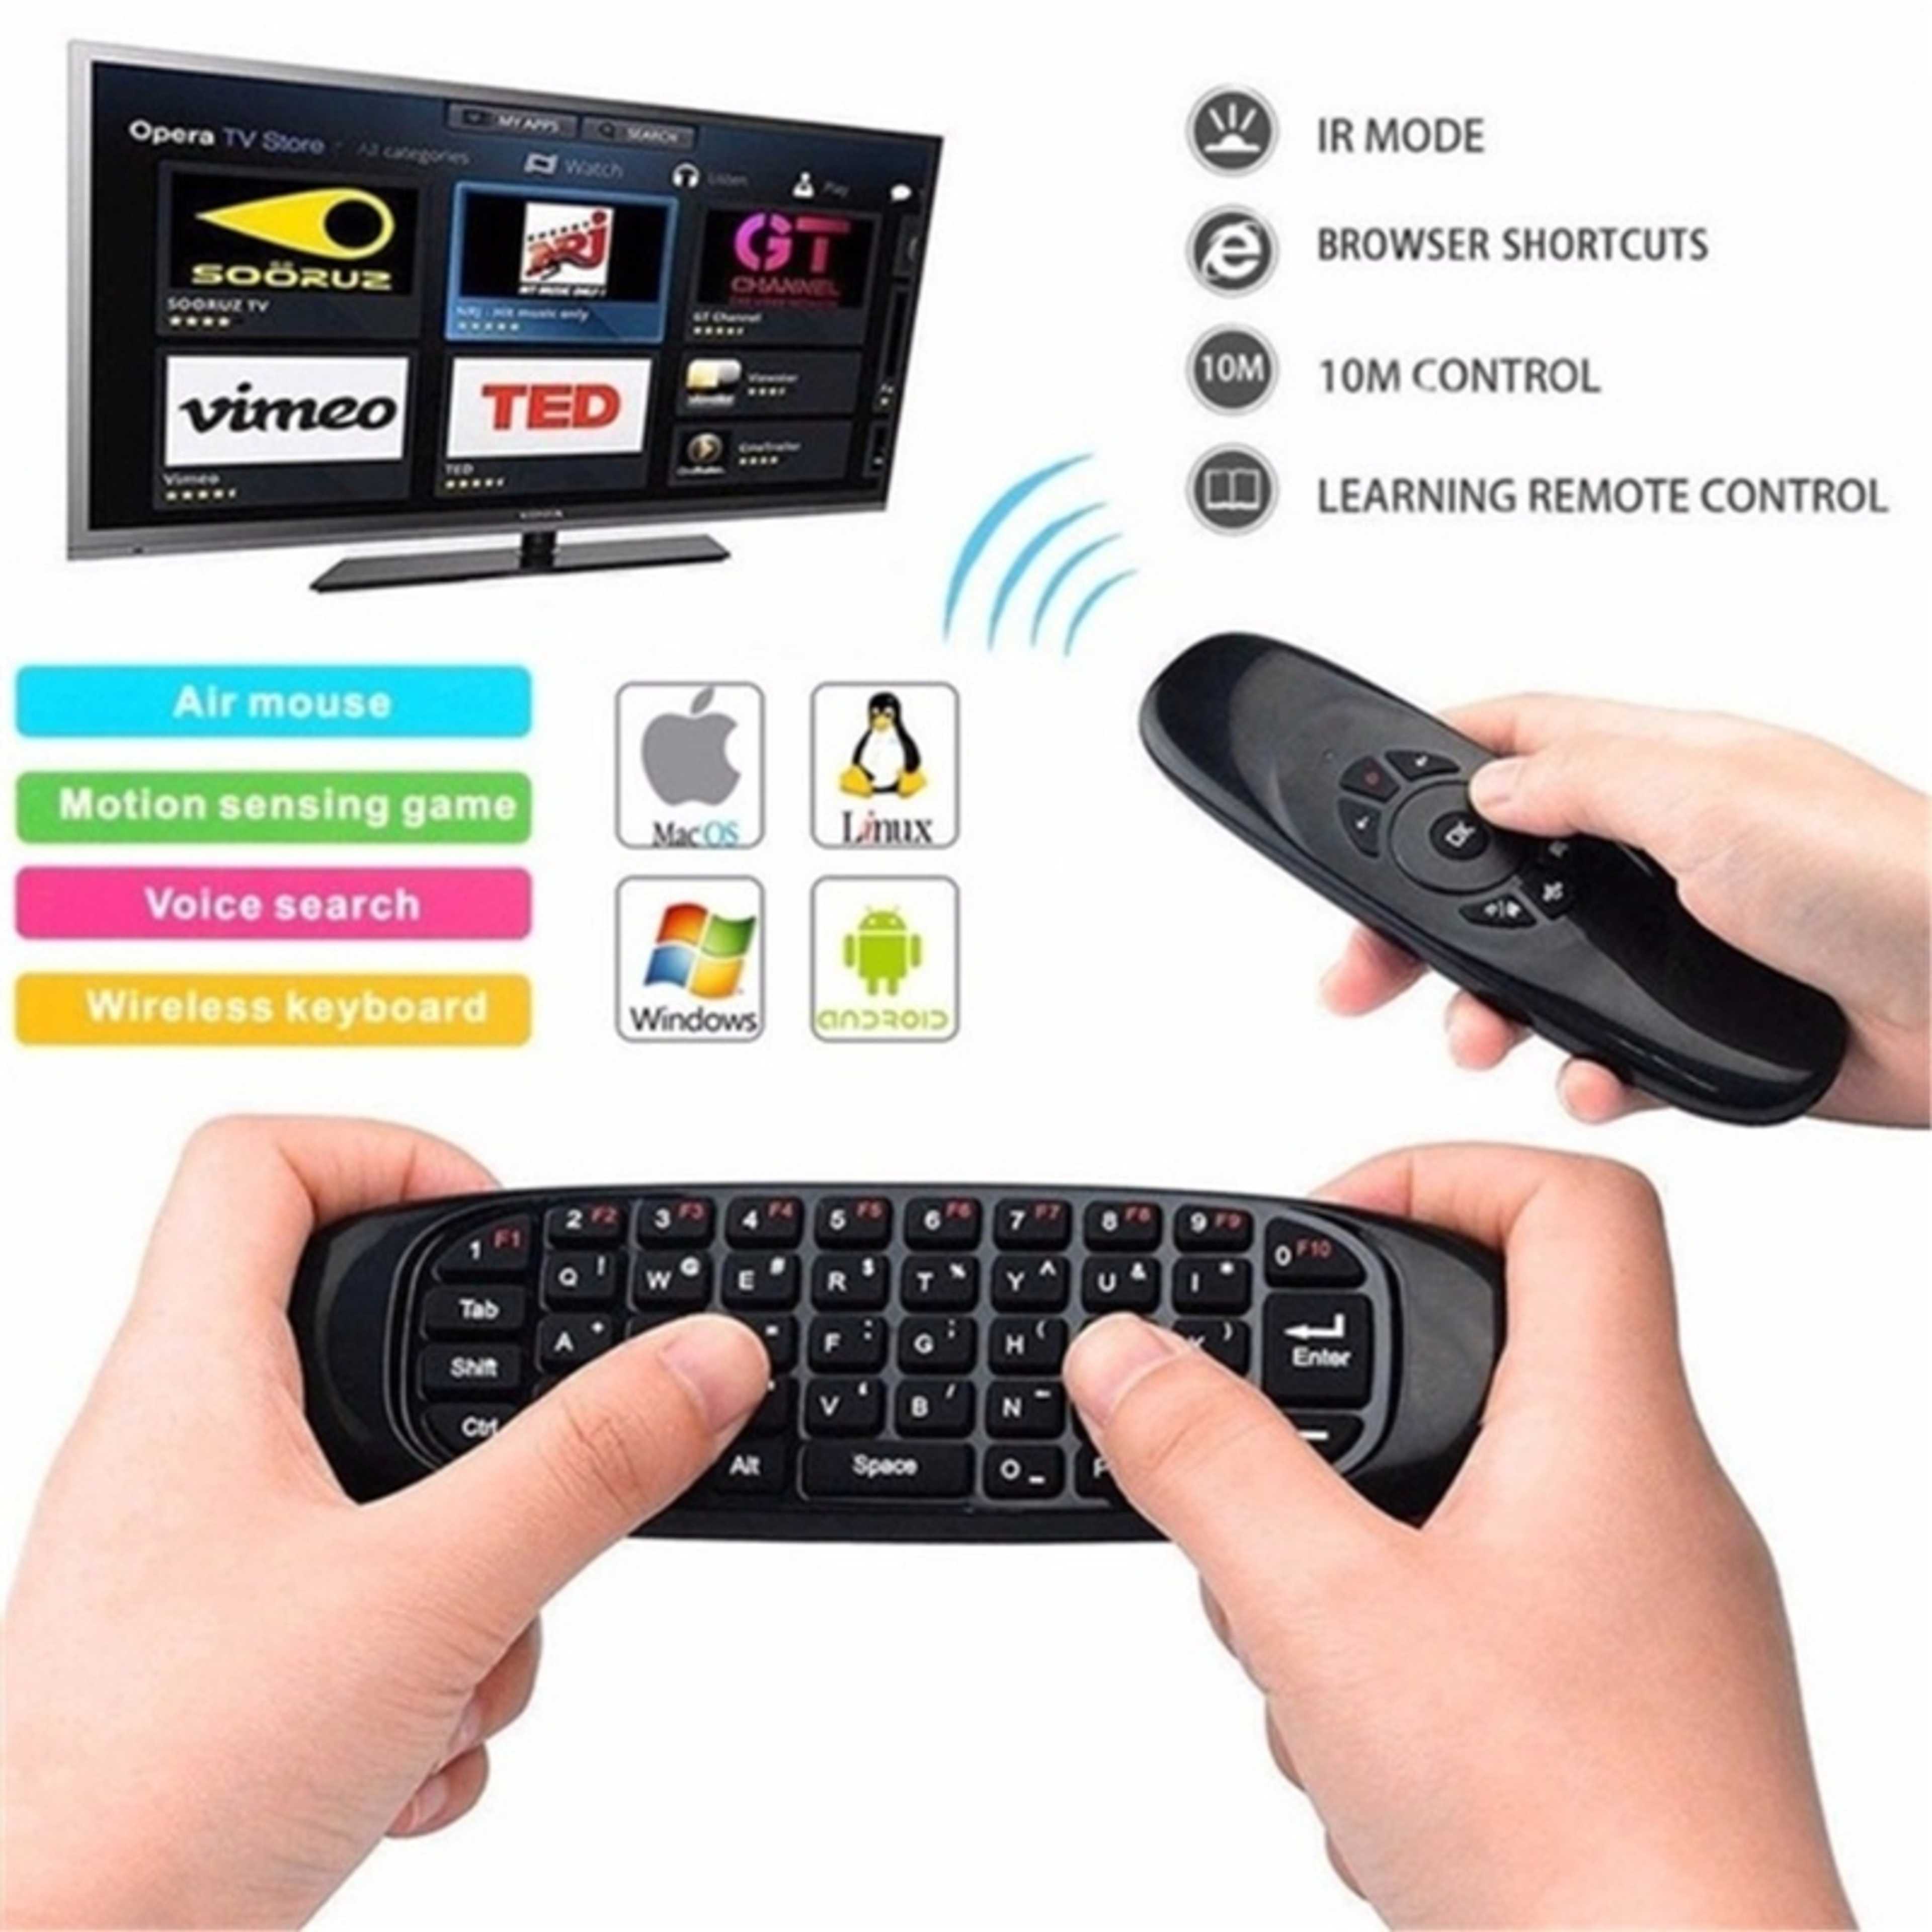 2.4GHz Flying Mouse 6-Axis Gyroscope Wireless Air Mouse Keyboard Remote Control For Smart TV PC